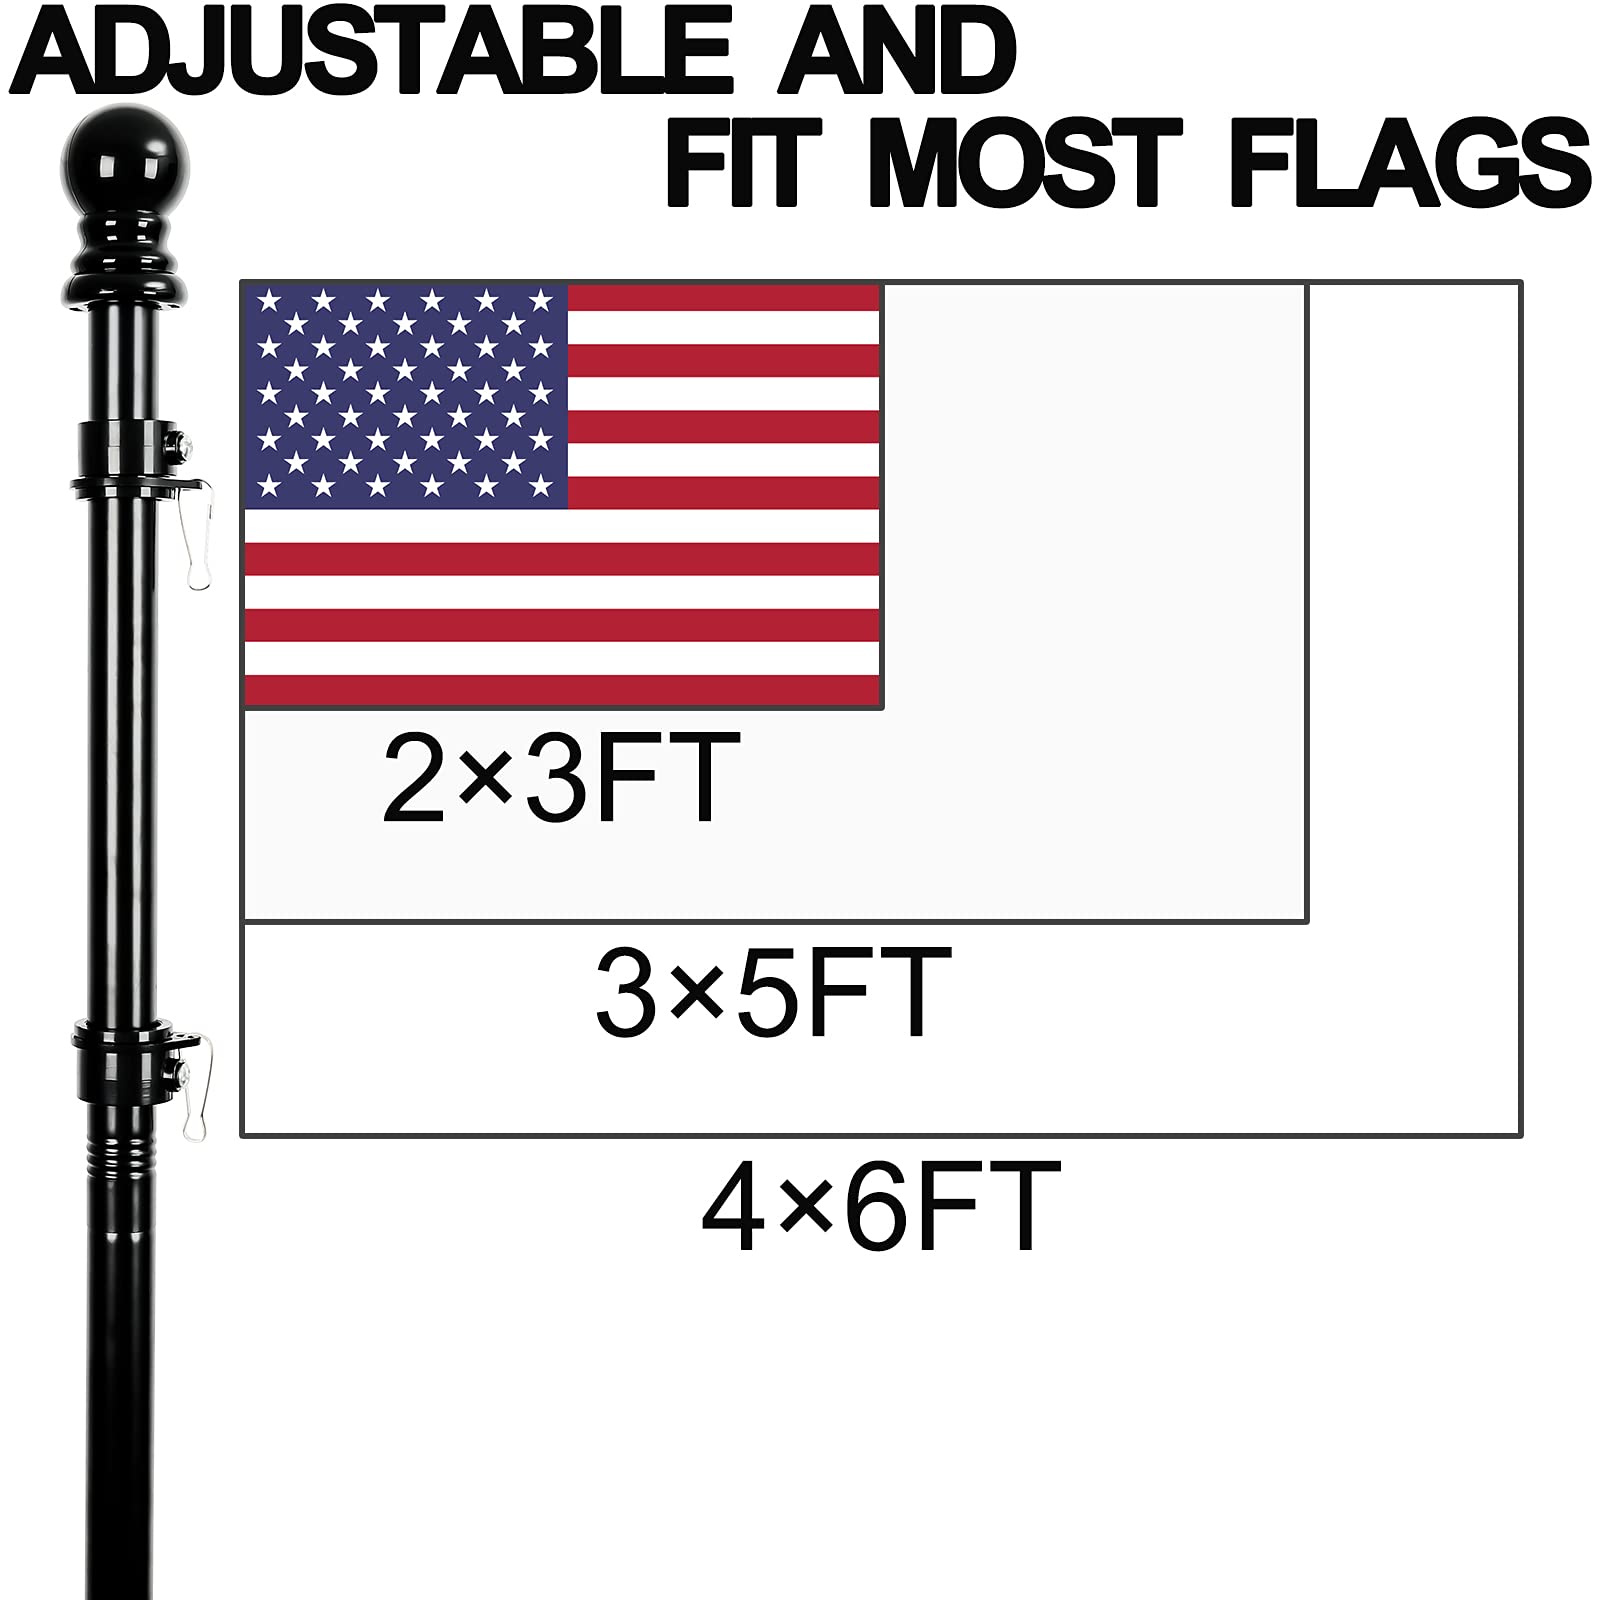 Bird Twig Flag Pole for House, 5 FT Flagpole Kit, american flag with pole and Bracket, Stainless Steel Professional Black Flag Pole for House Garden Yard, Residential or Commercial Flag Pole